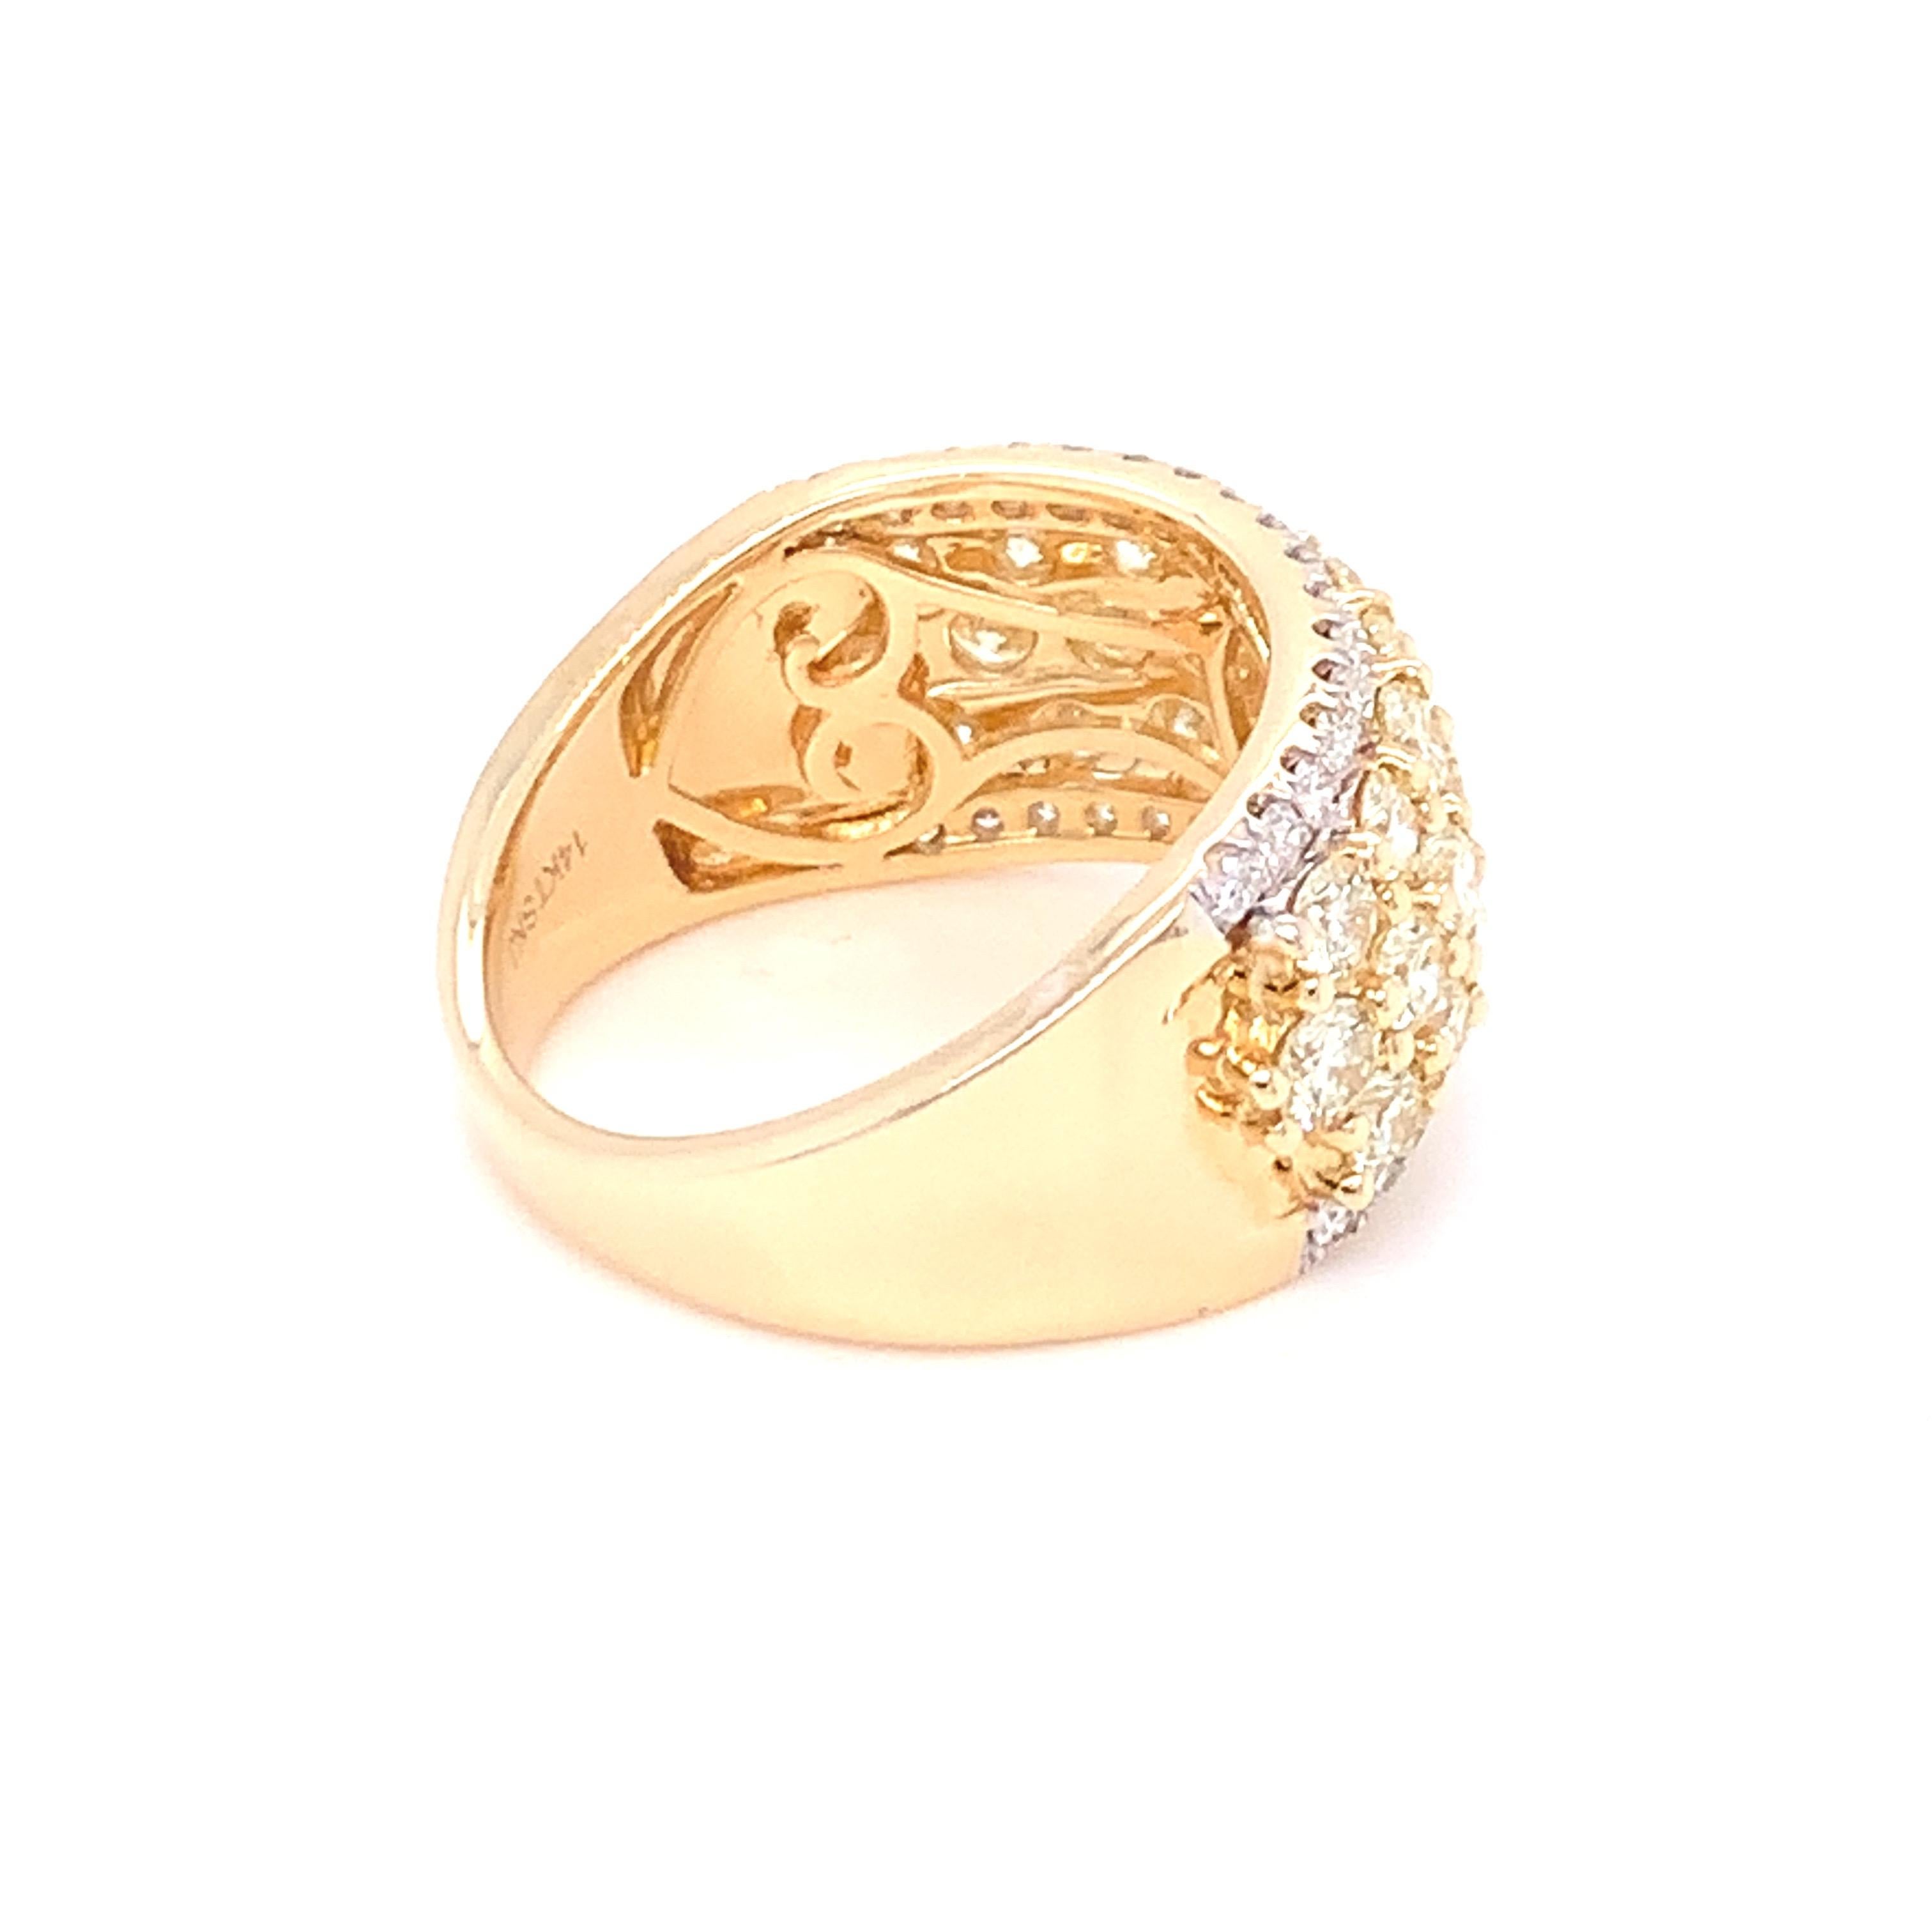 2.50 Carat Yellow & White Diamond Band Ring in 14k Yellow Gold For Sale 3